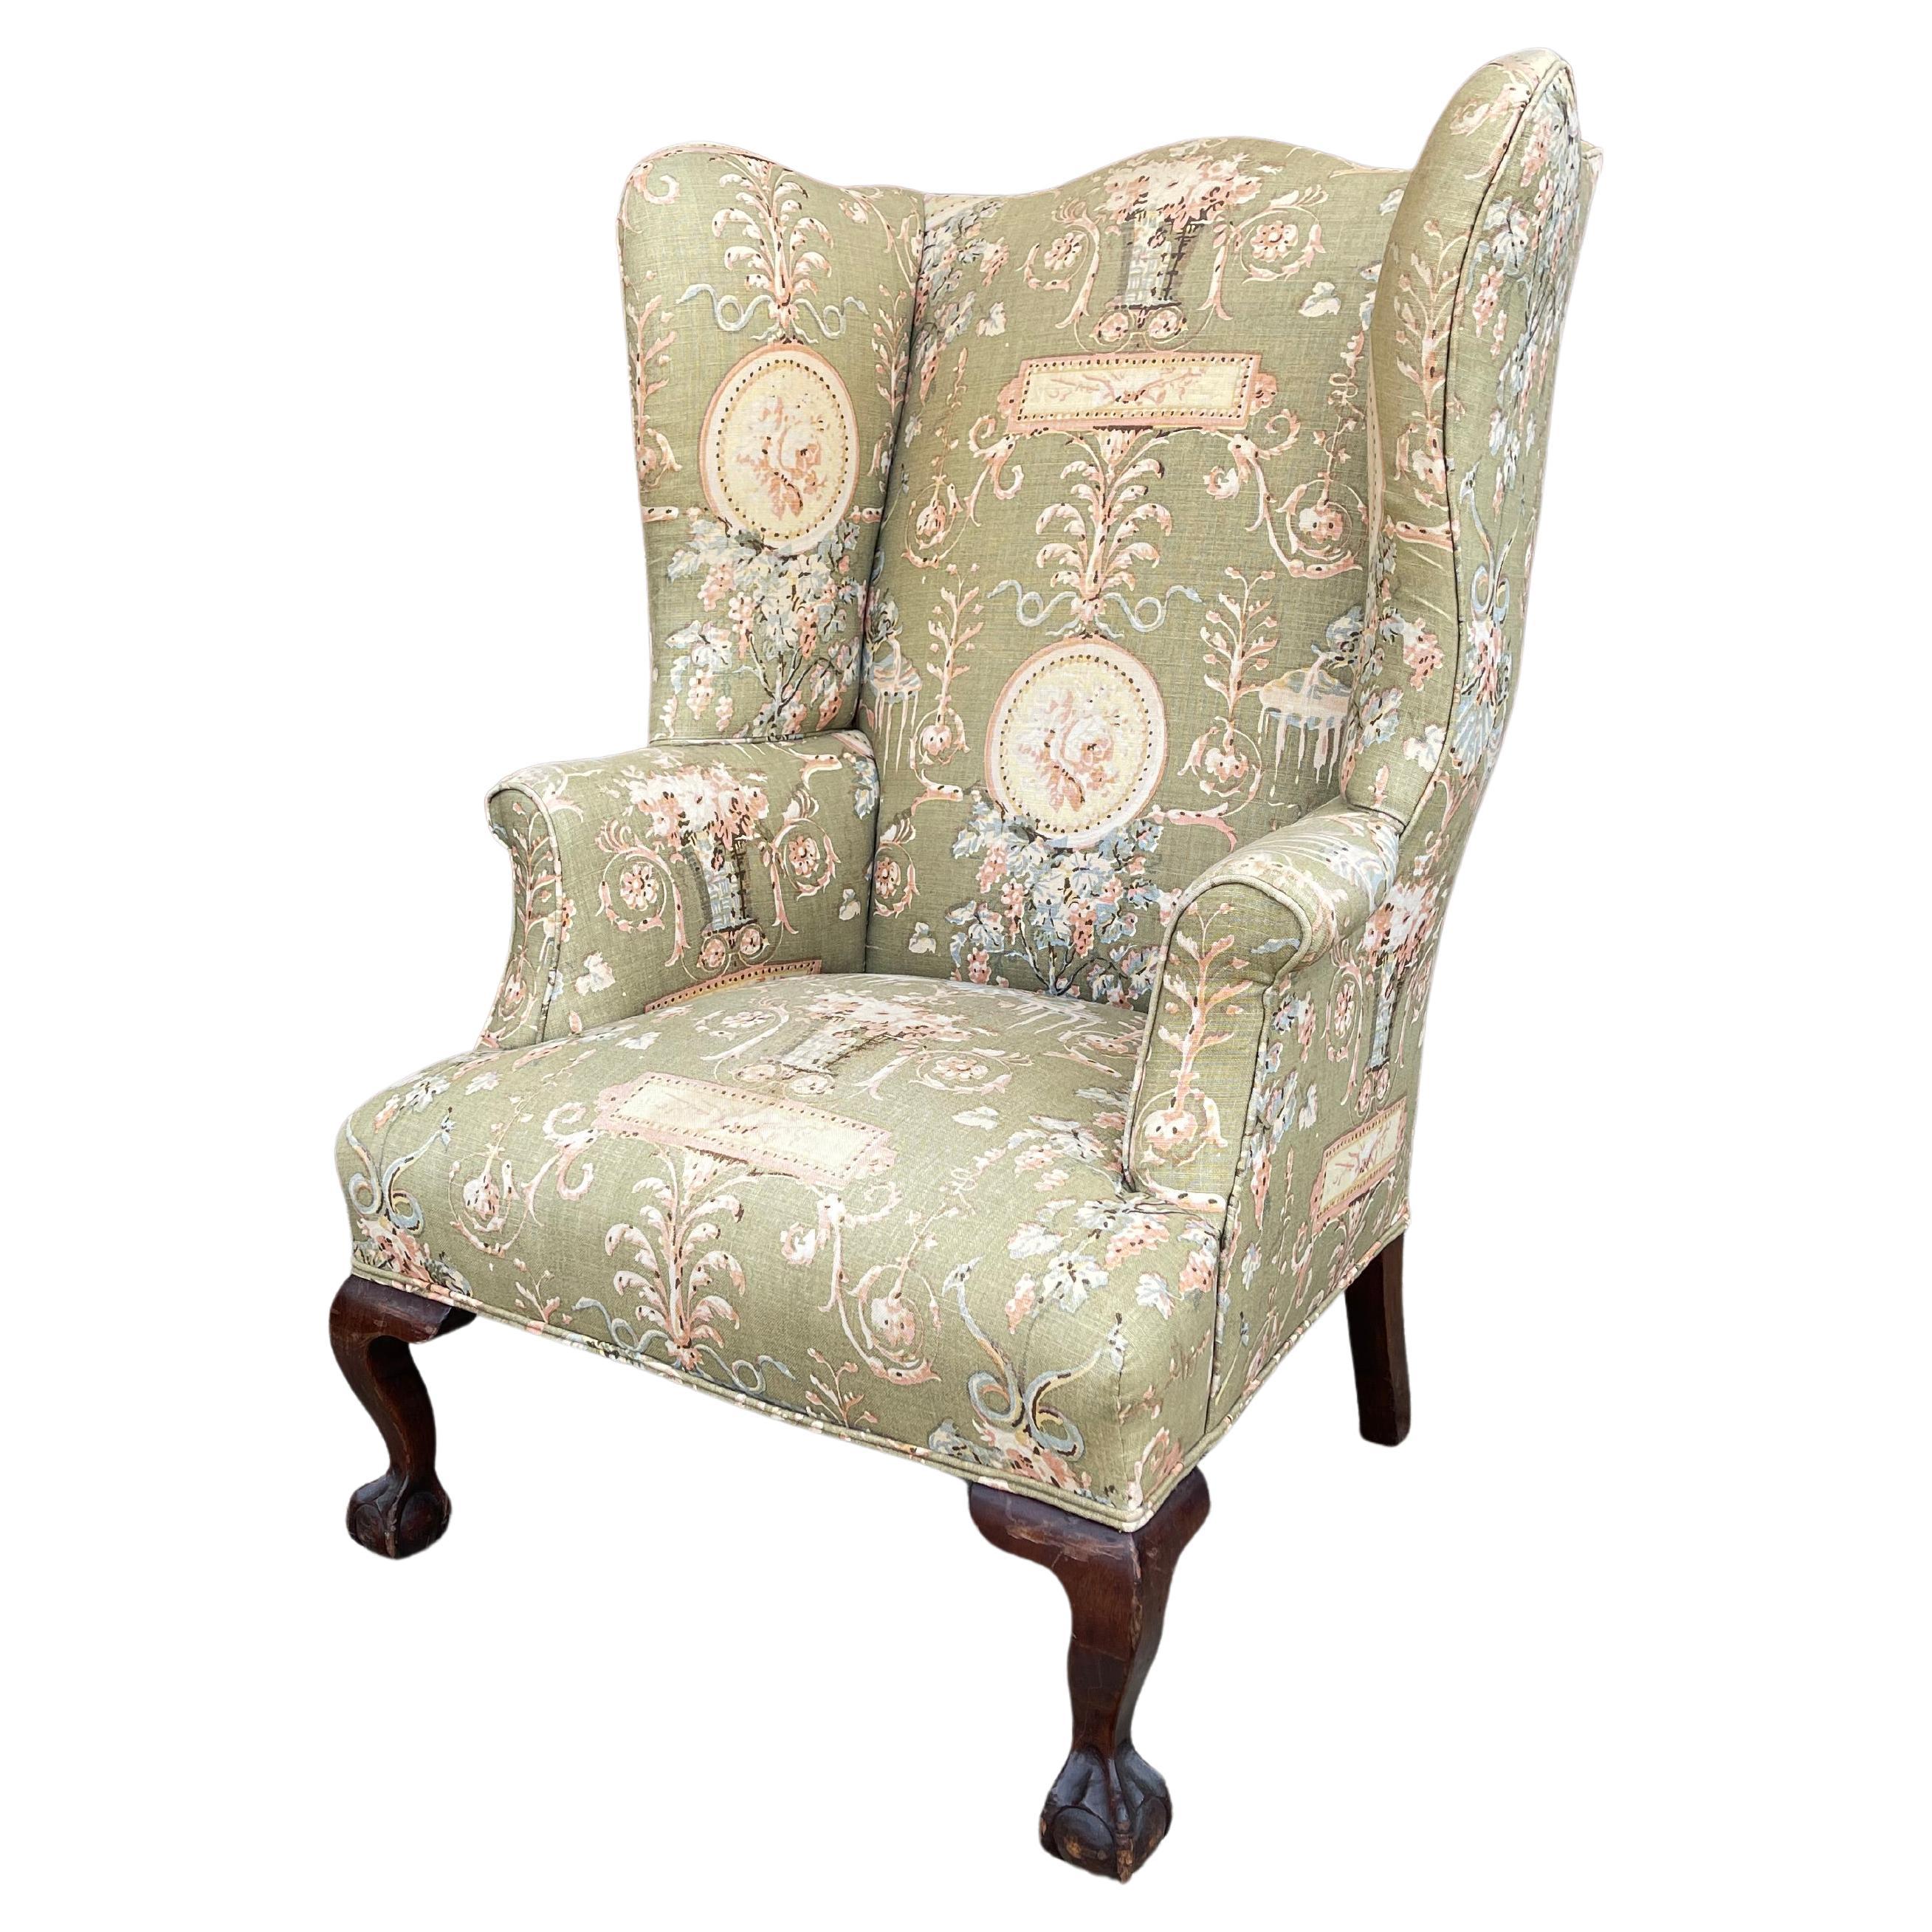 Antique English Queen Anne Style Upholstered Wingback Chair